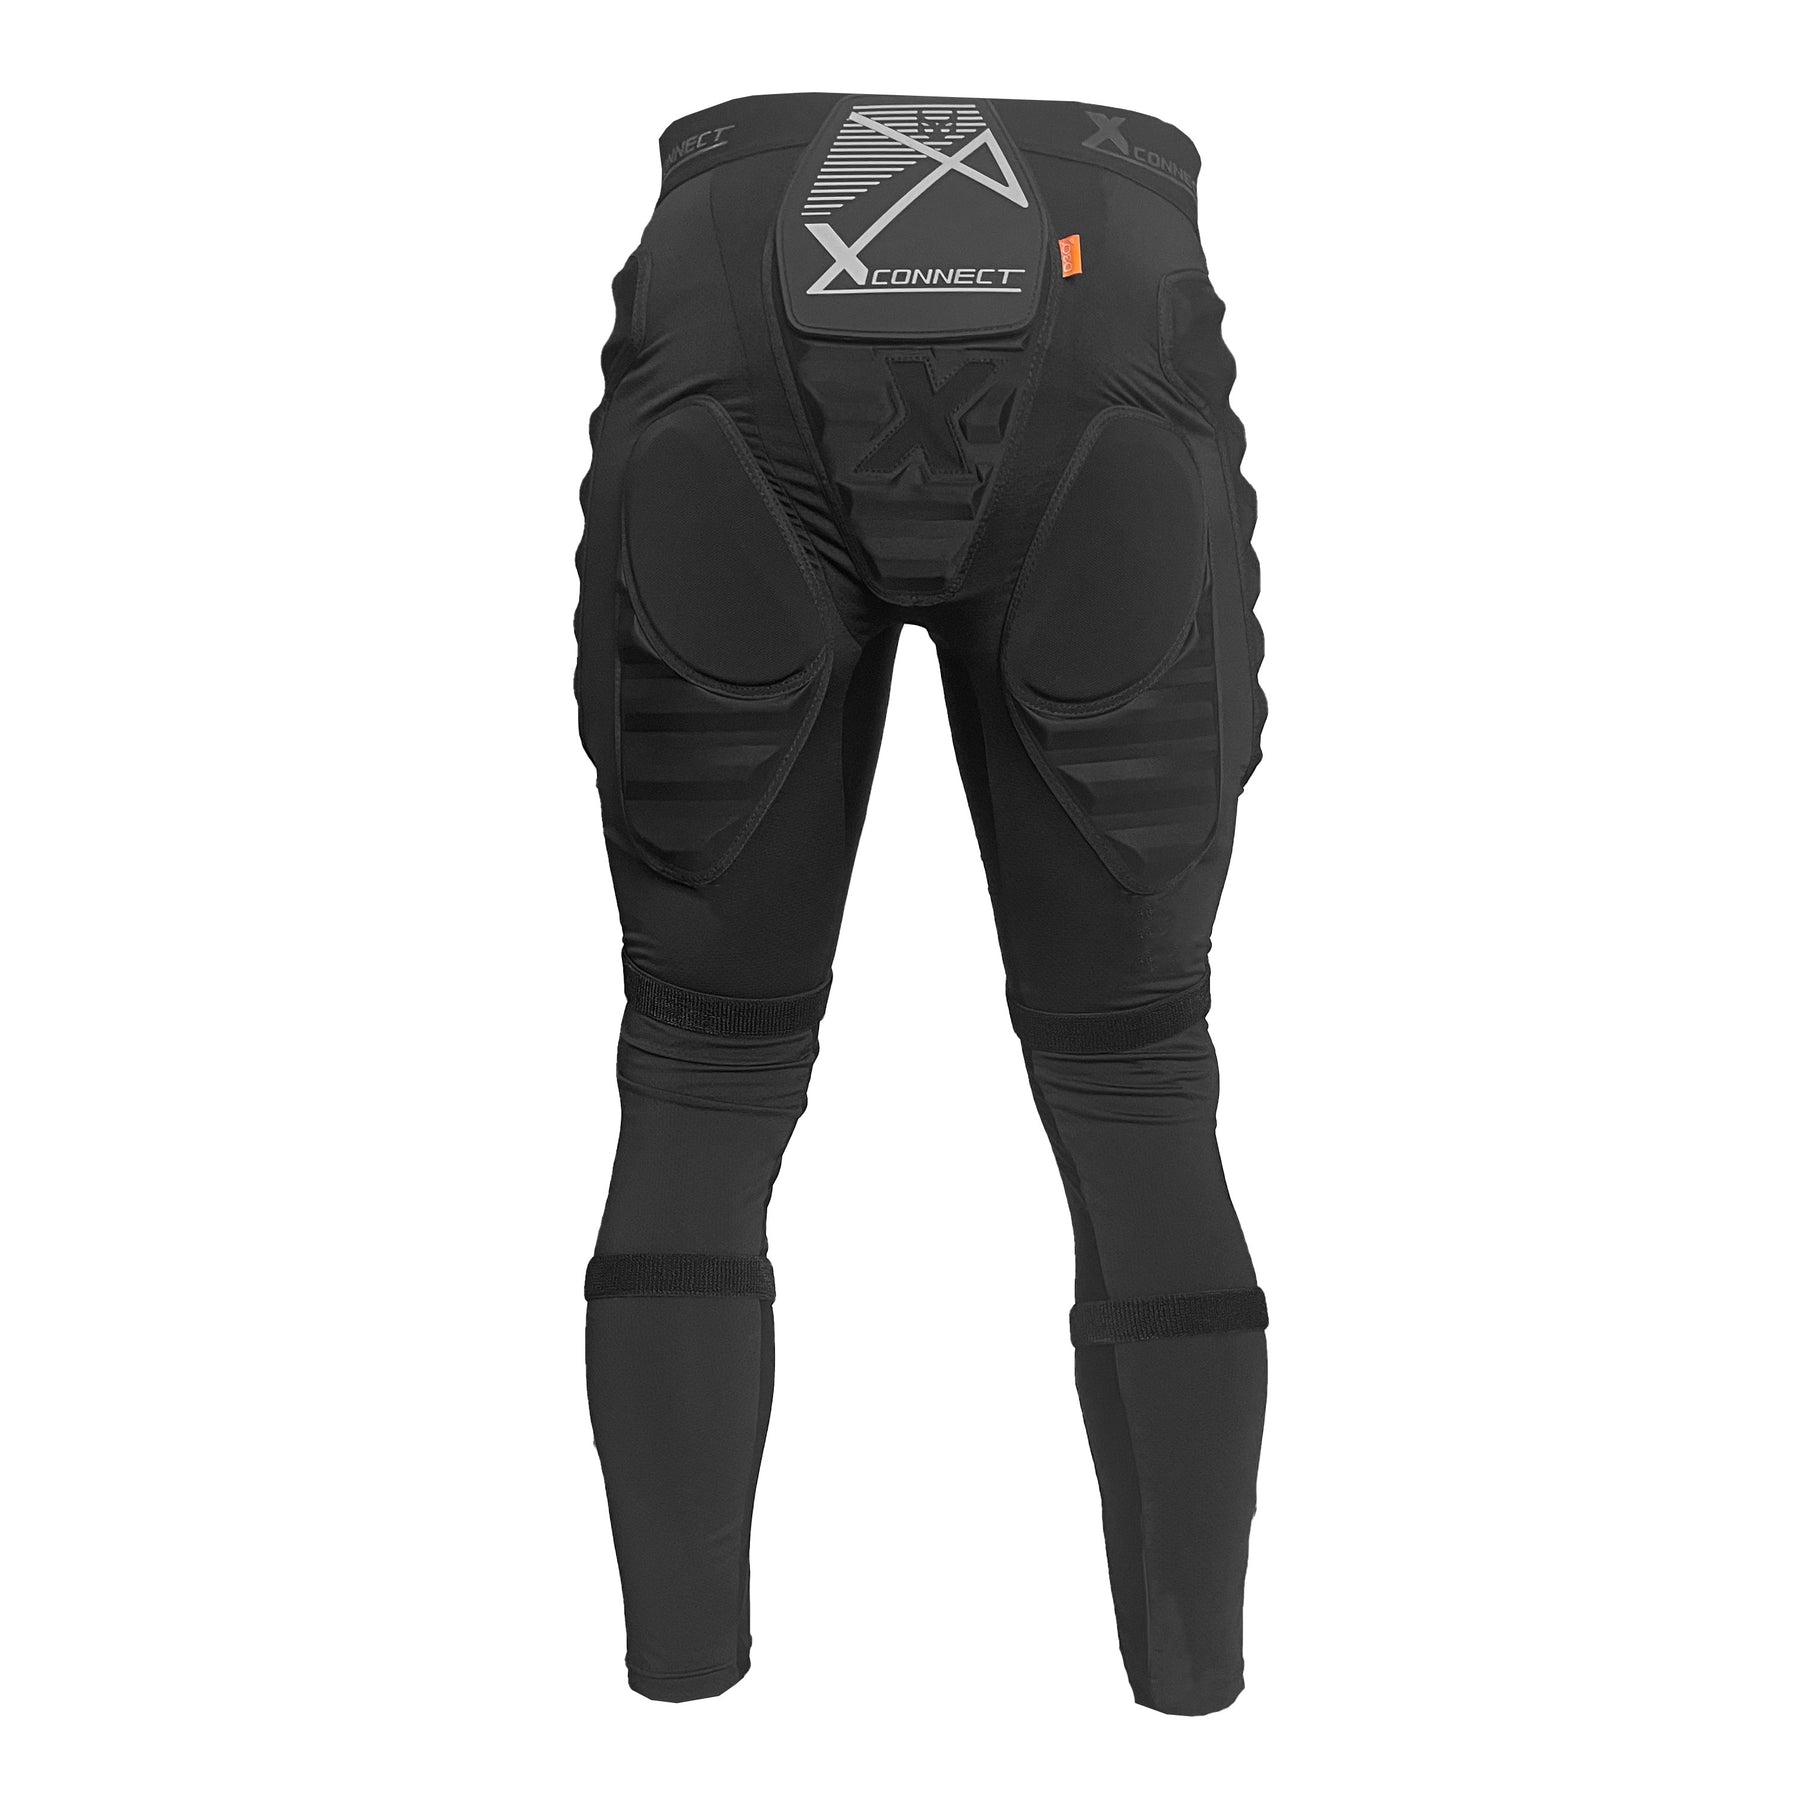 Demon United AzzPadz with D30 Tailbone Protector (Large)